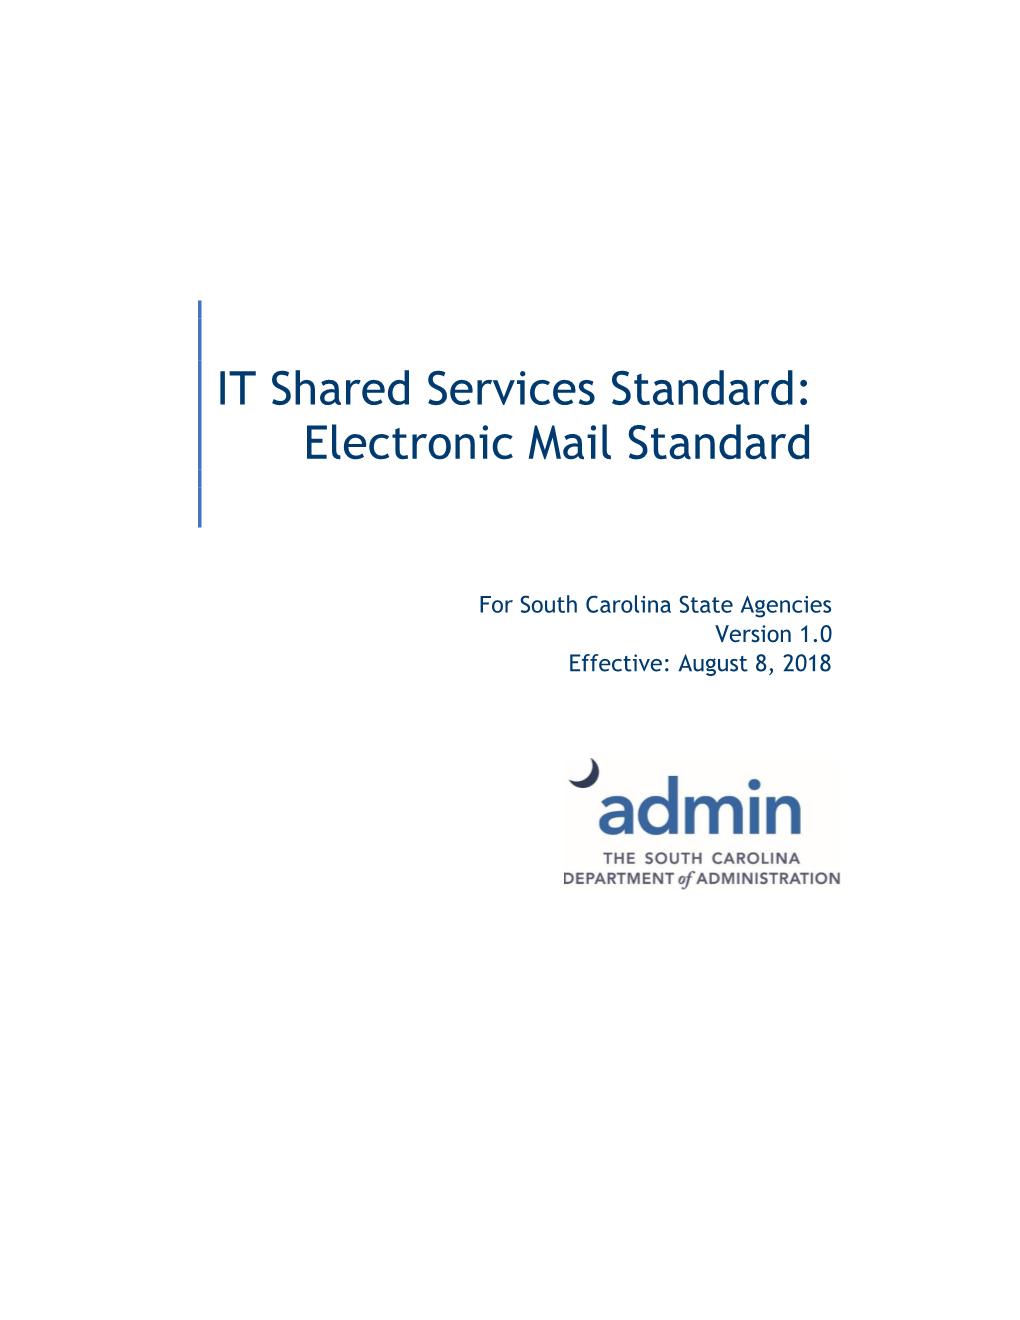 Electronic Mail Standard